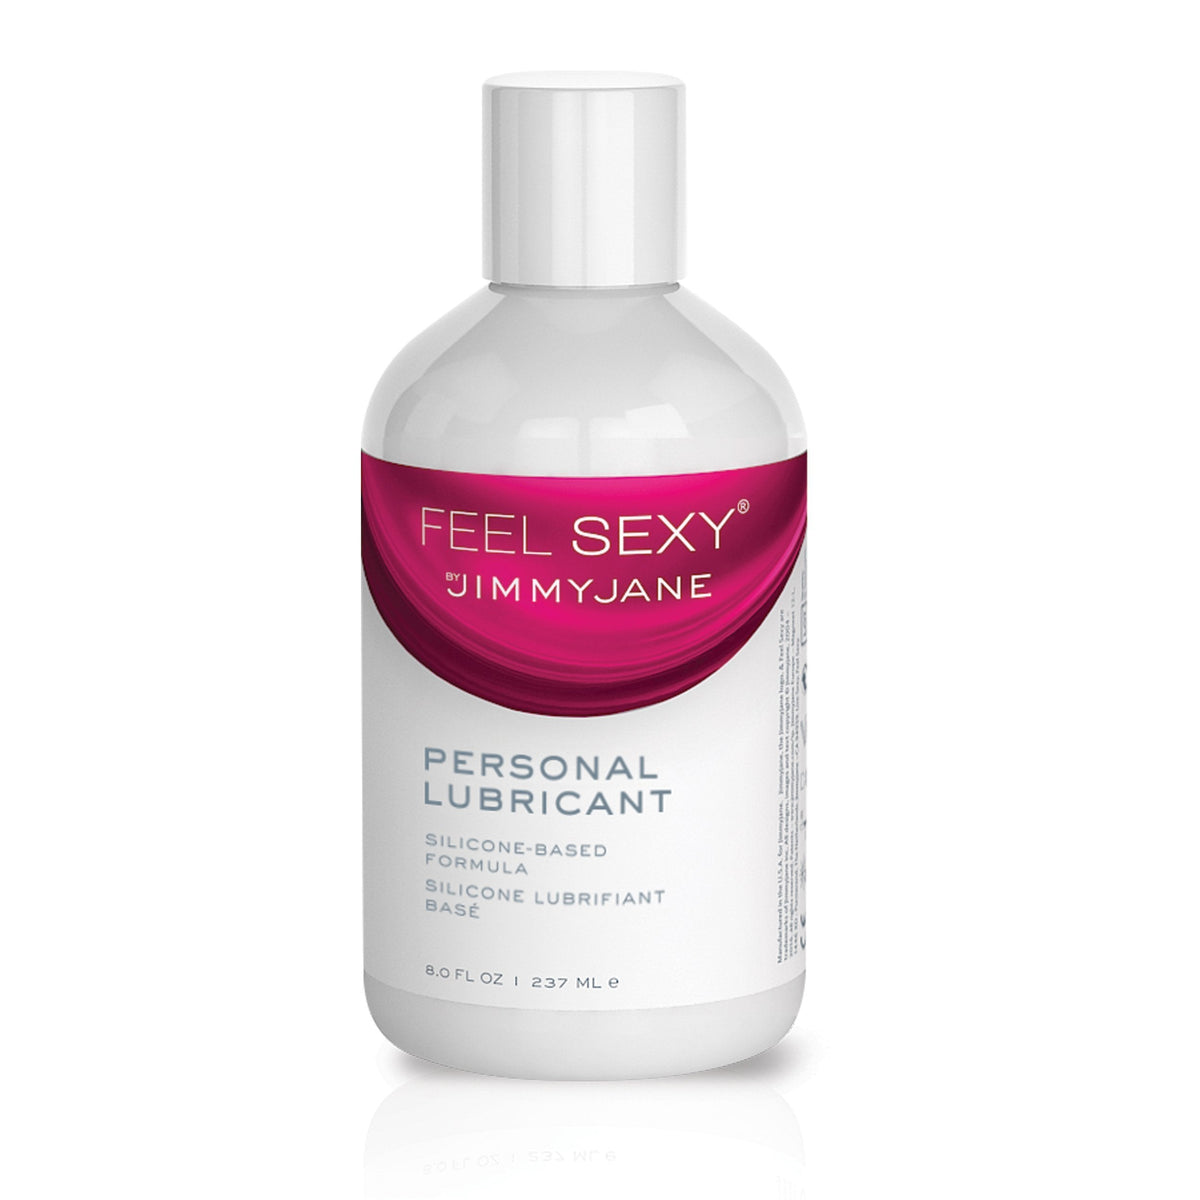 Jimmy Jane - Feel Sexy Personal Silicone-Based Lubricant 8oz (White) -  Lube (Silicone Based)  Durio.sg